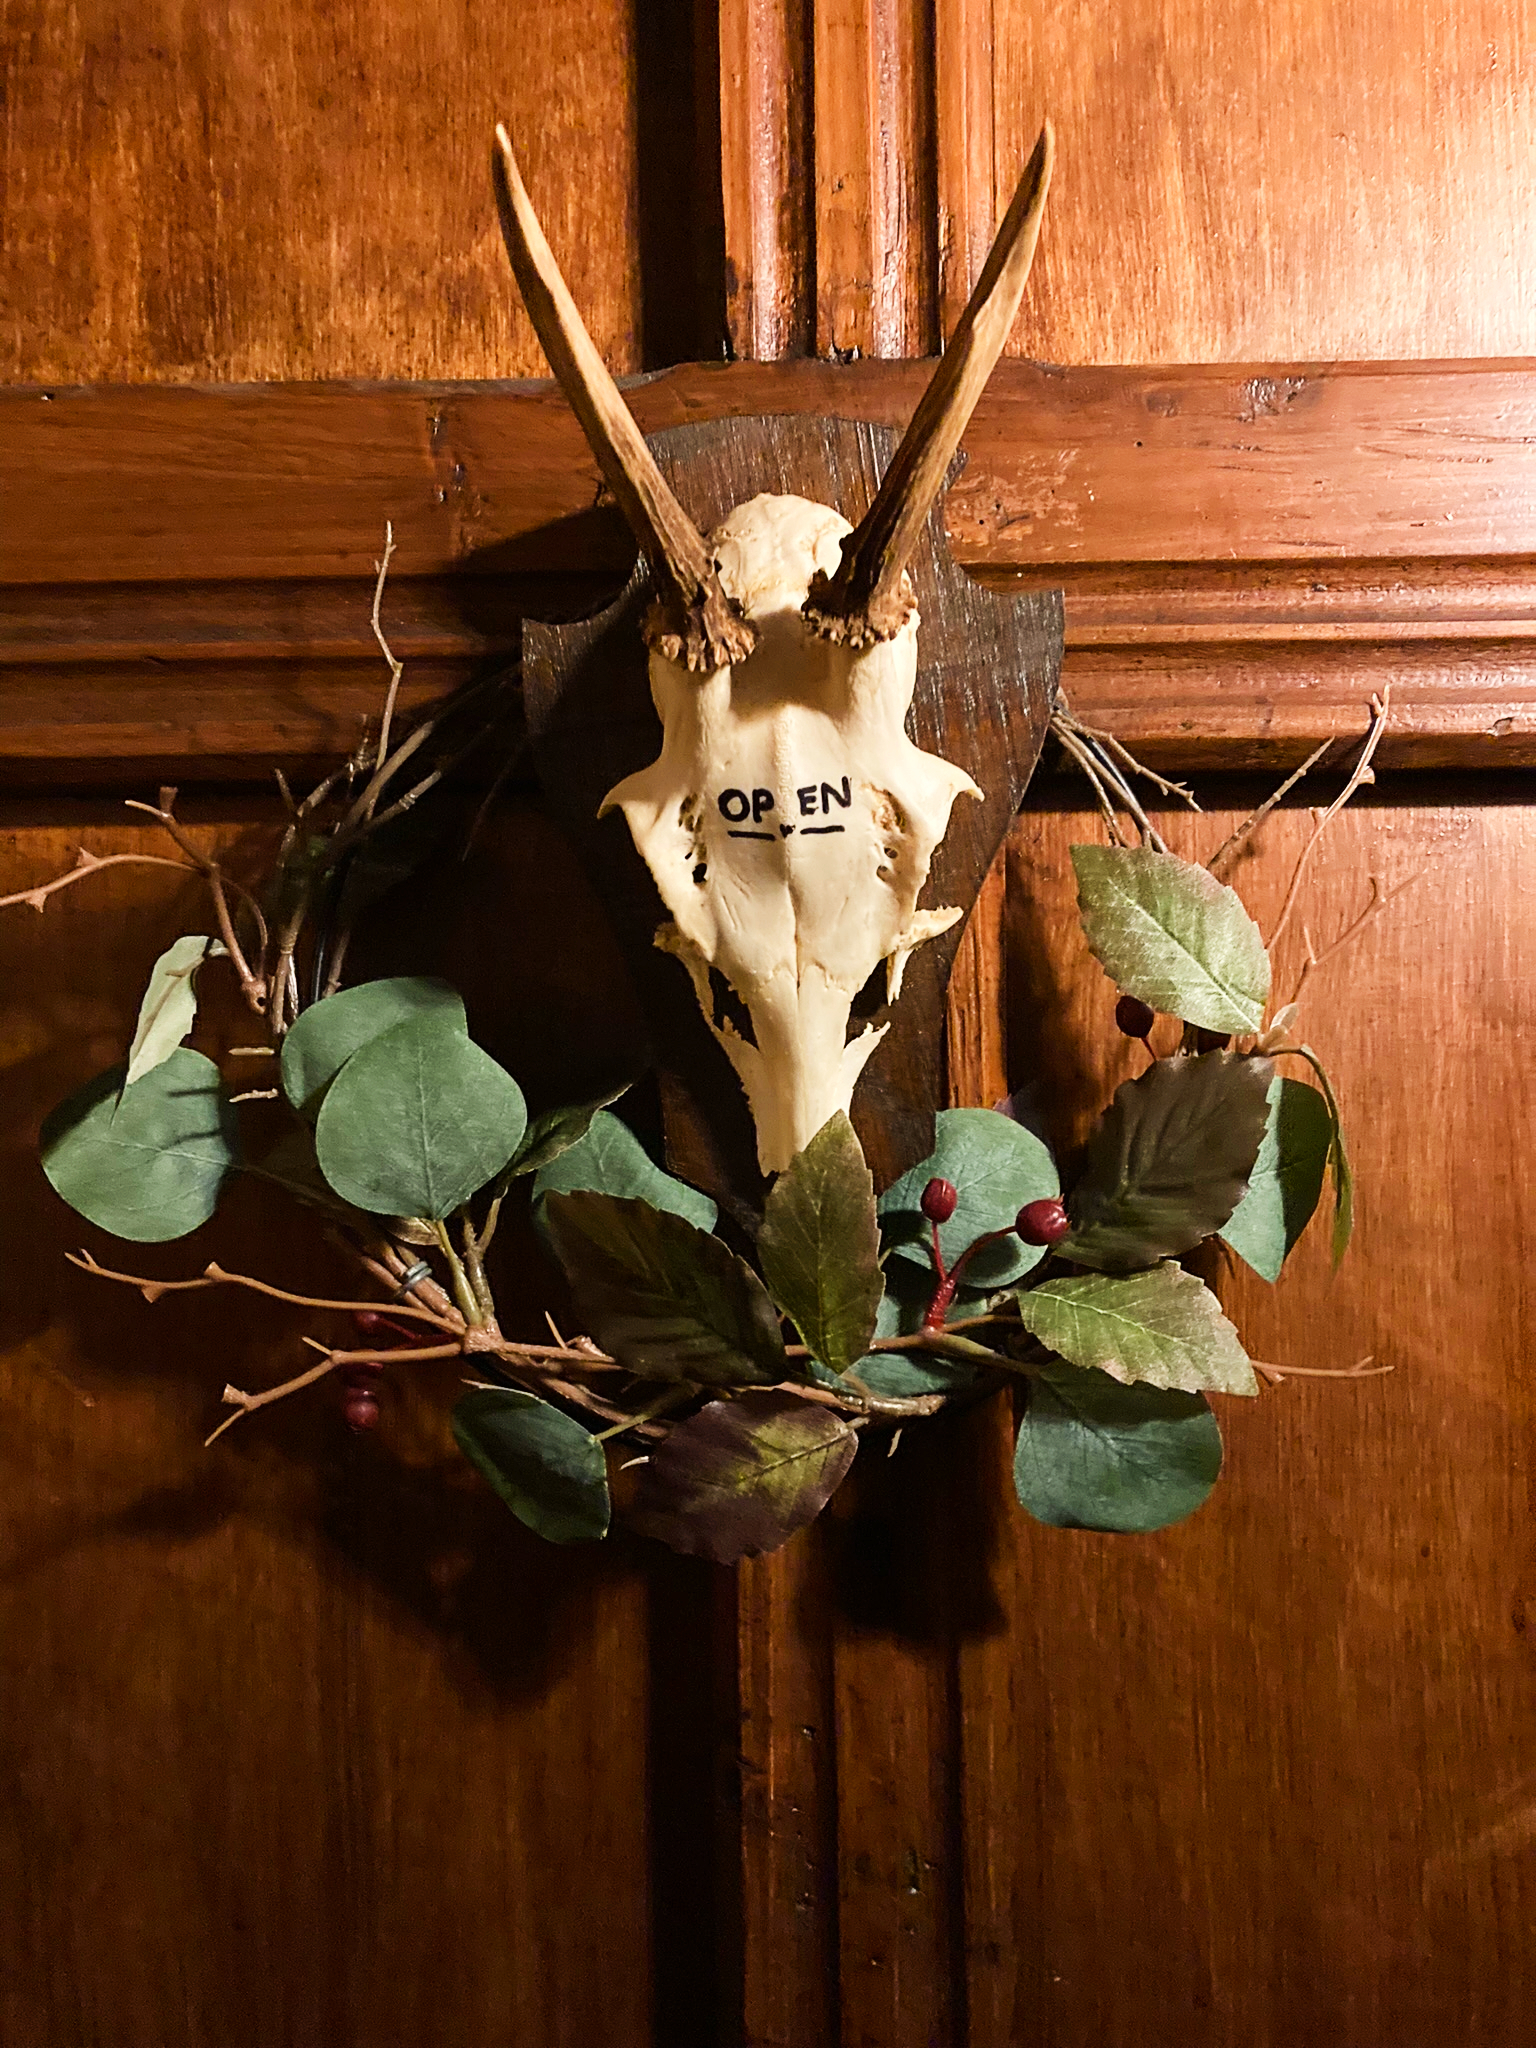 Welcome to Blagraves: the skull that greets the visitor